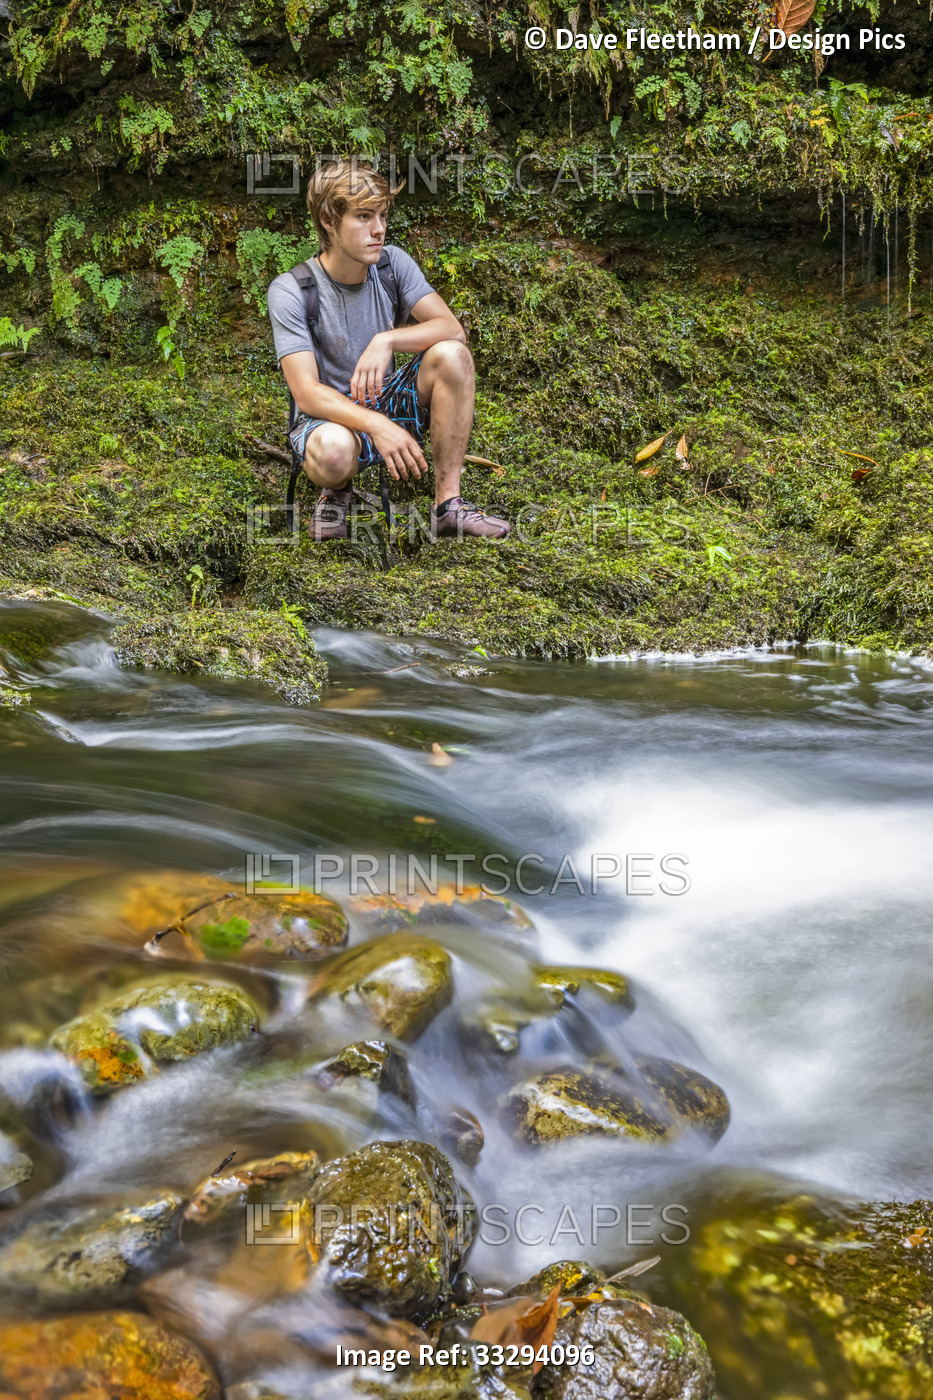 A young man crouches next to a small stream running through a forest in ...